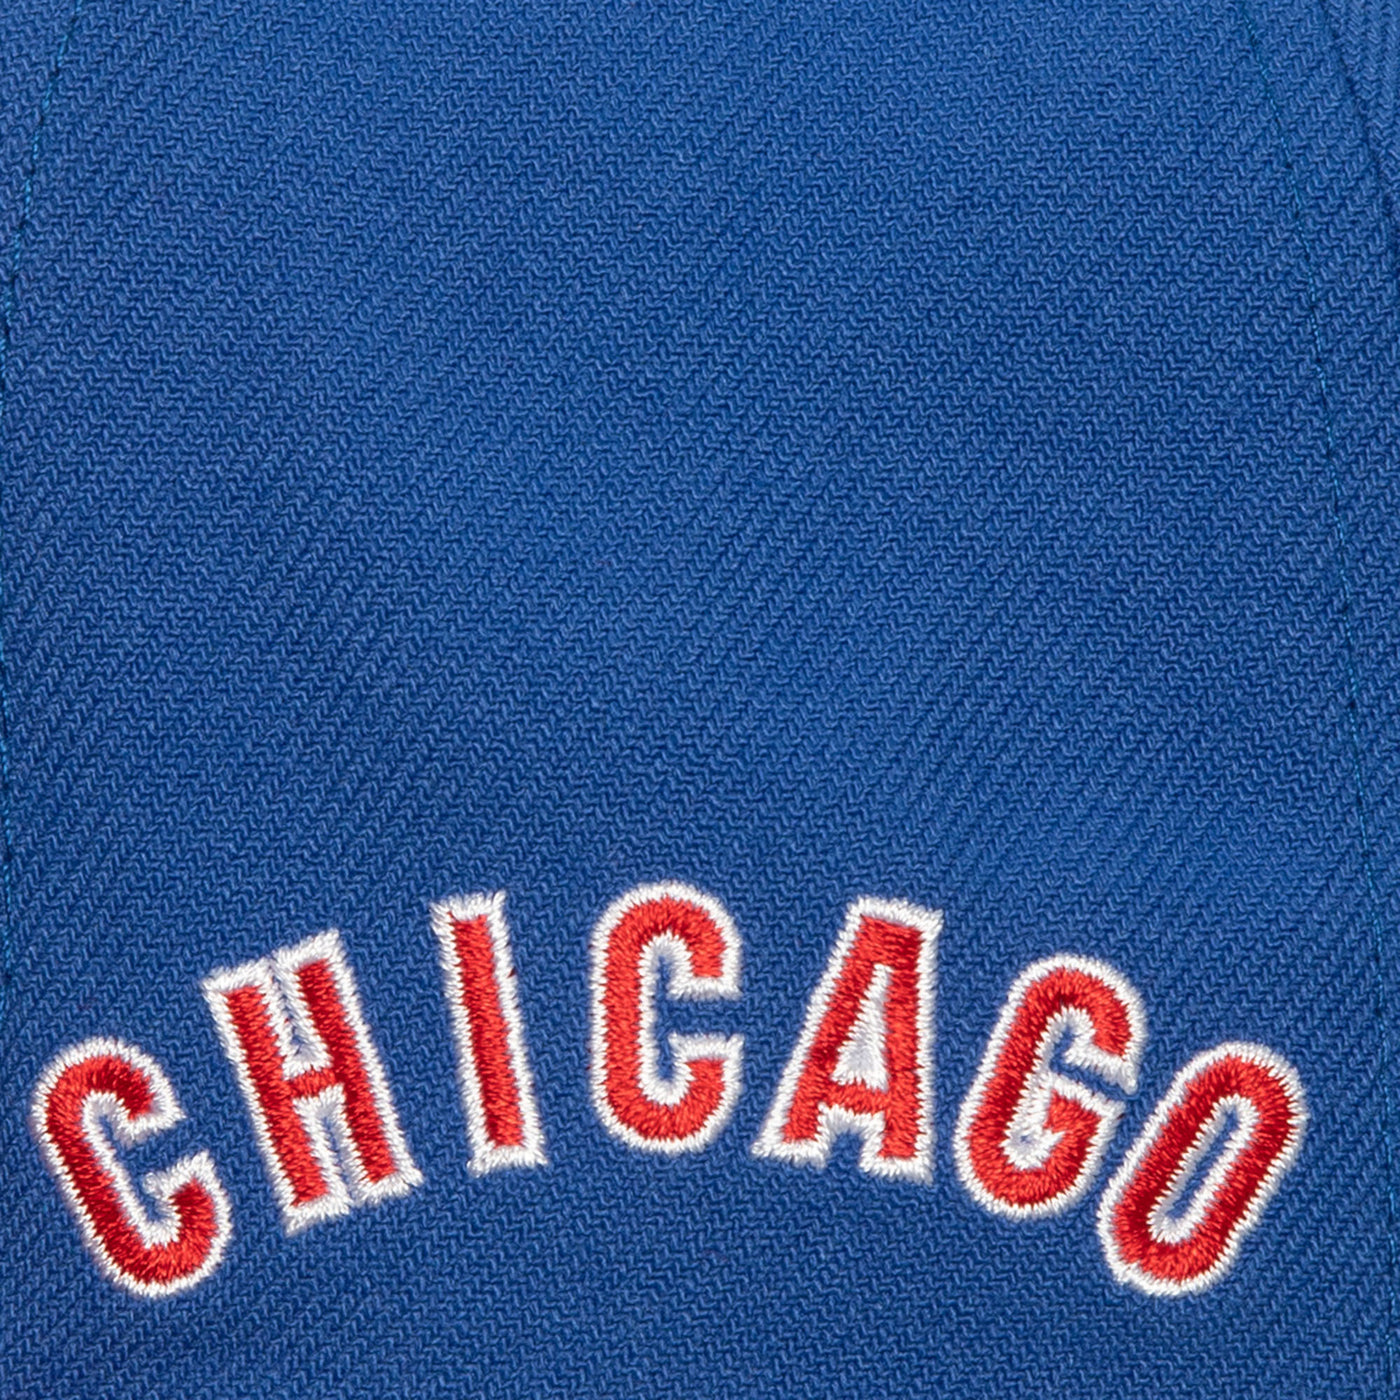 CHICAGO CUBS MITCHELL & NESS 1969 LOGO TRICOLOR FITTED CAP